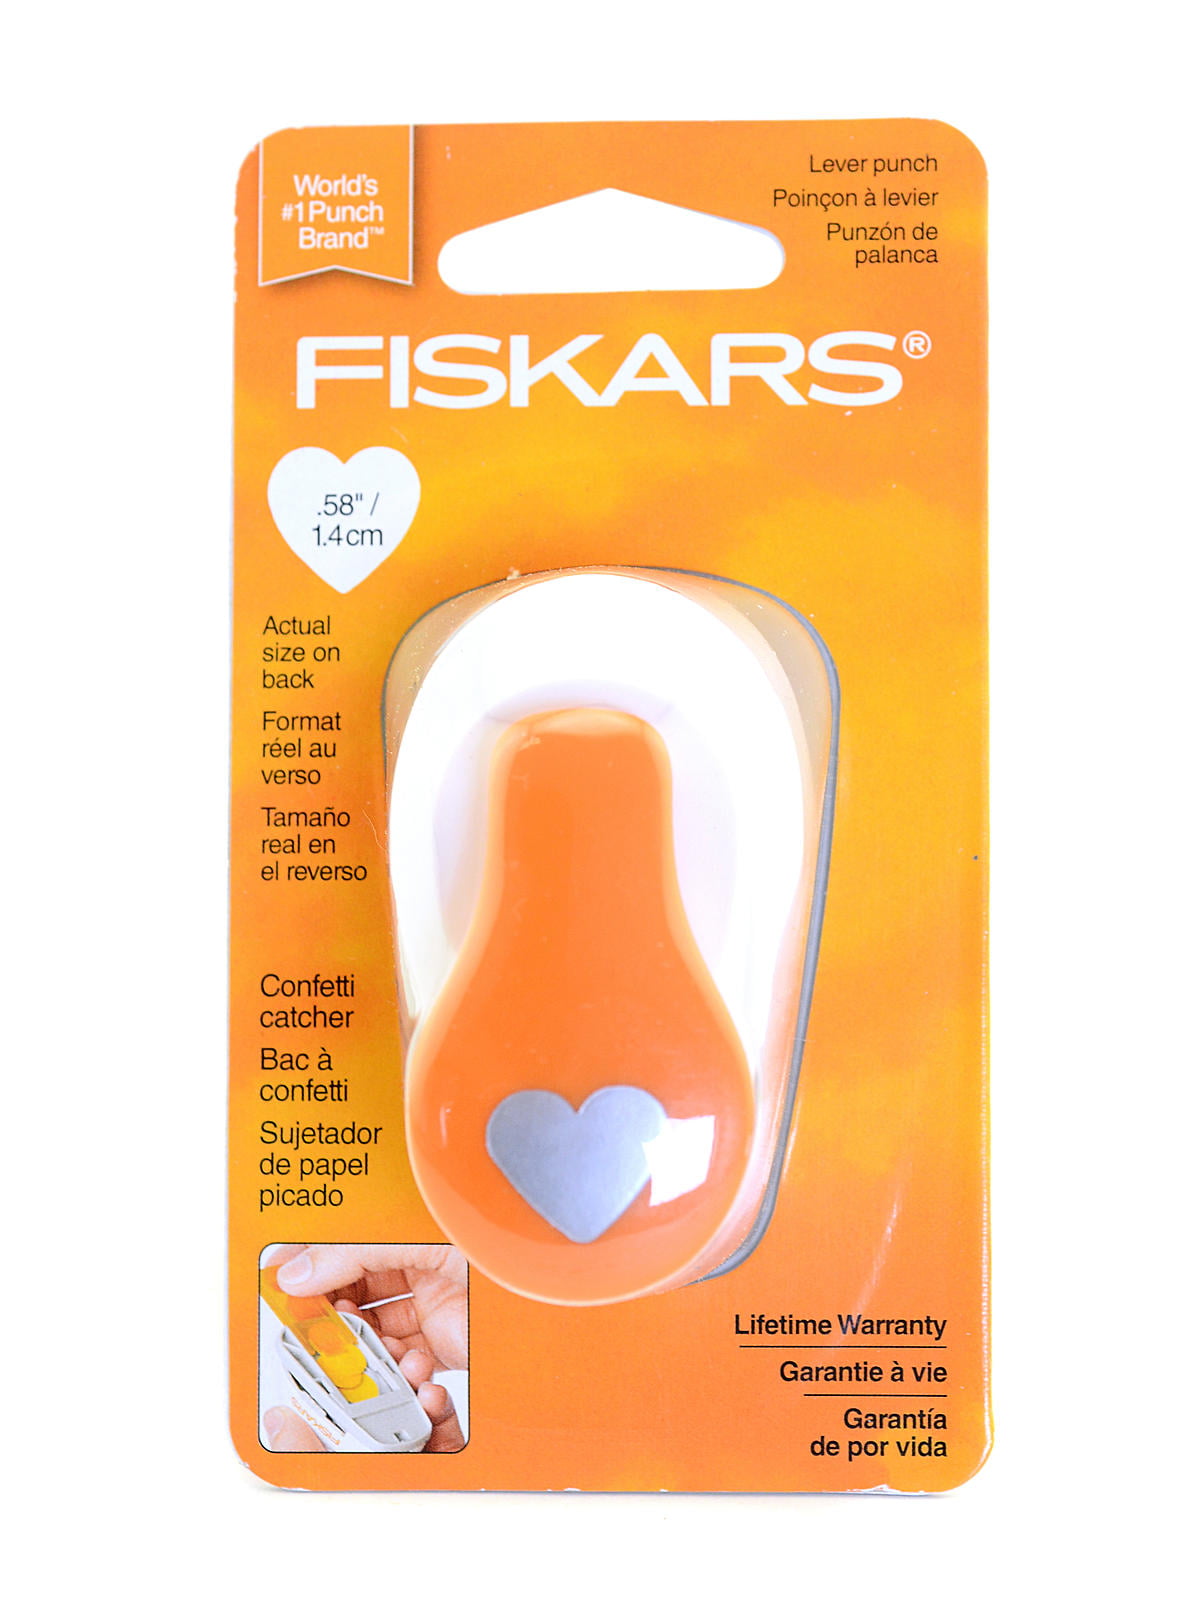 Fiskars Power Punch L White/Orange 1020493 Circle Quality Steel/Plastic For Left- and Right-handed Use Ø 3.8 cm 